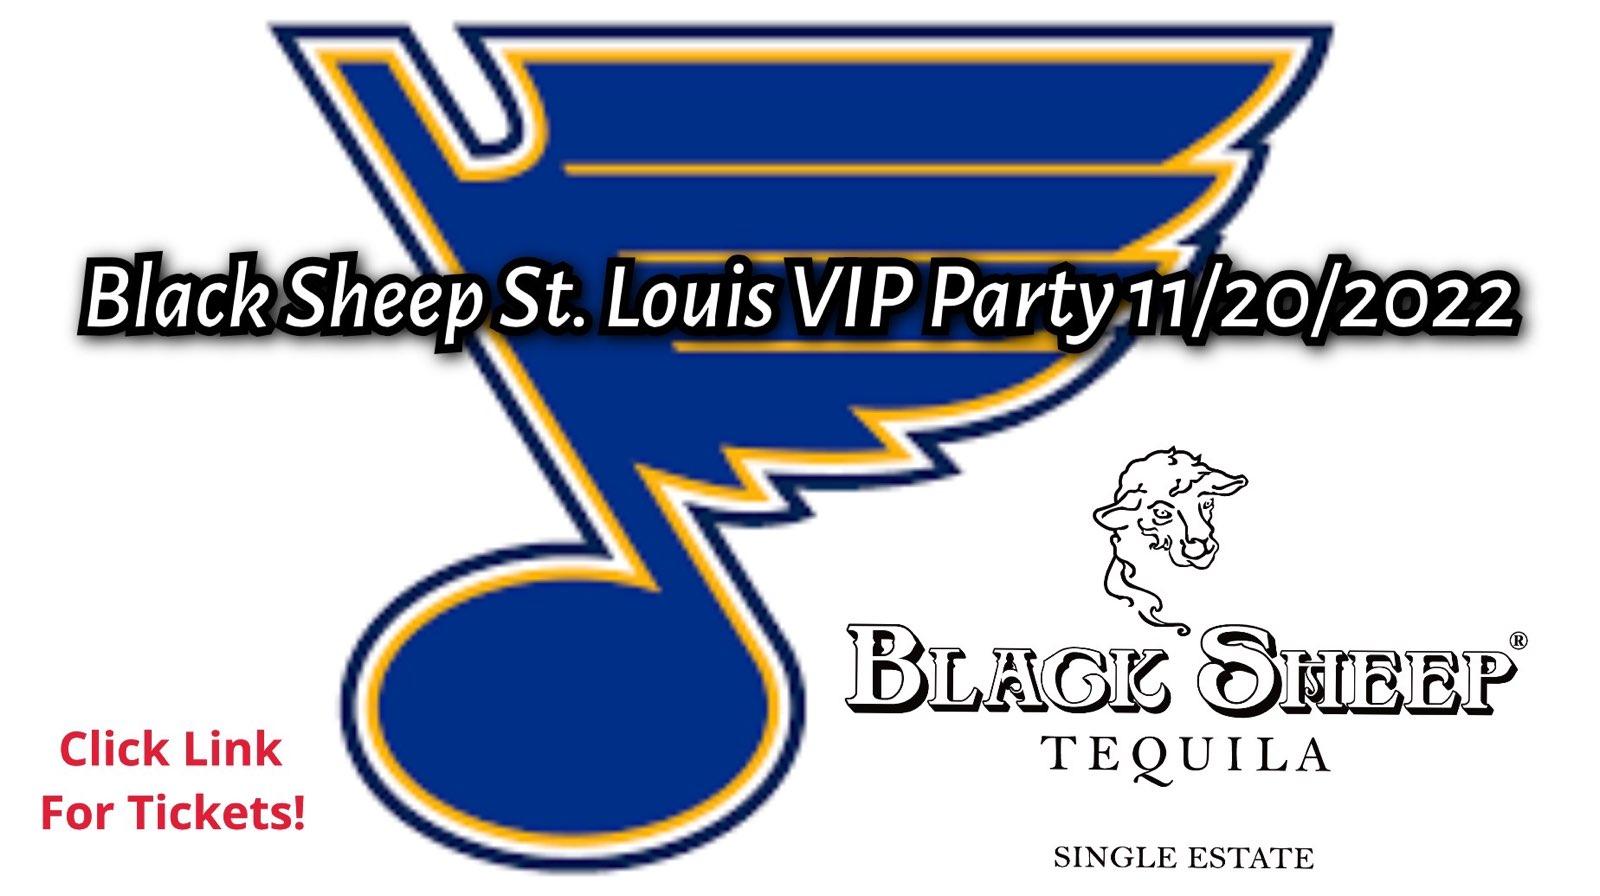 
Black Sheep Tequila VIP St. Louis Launch Party